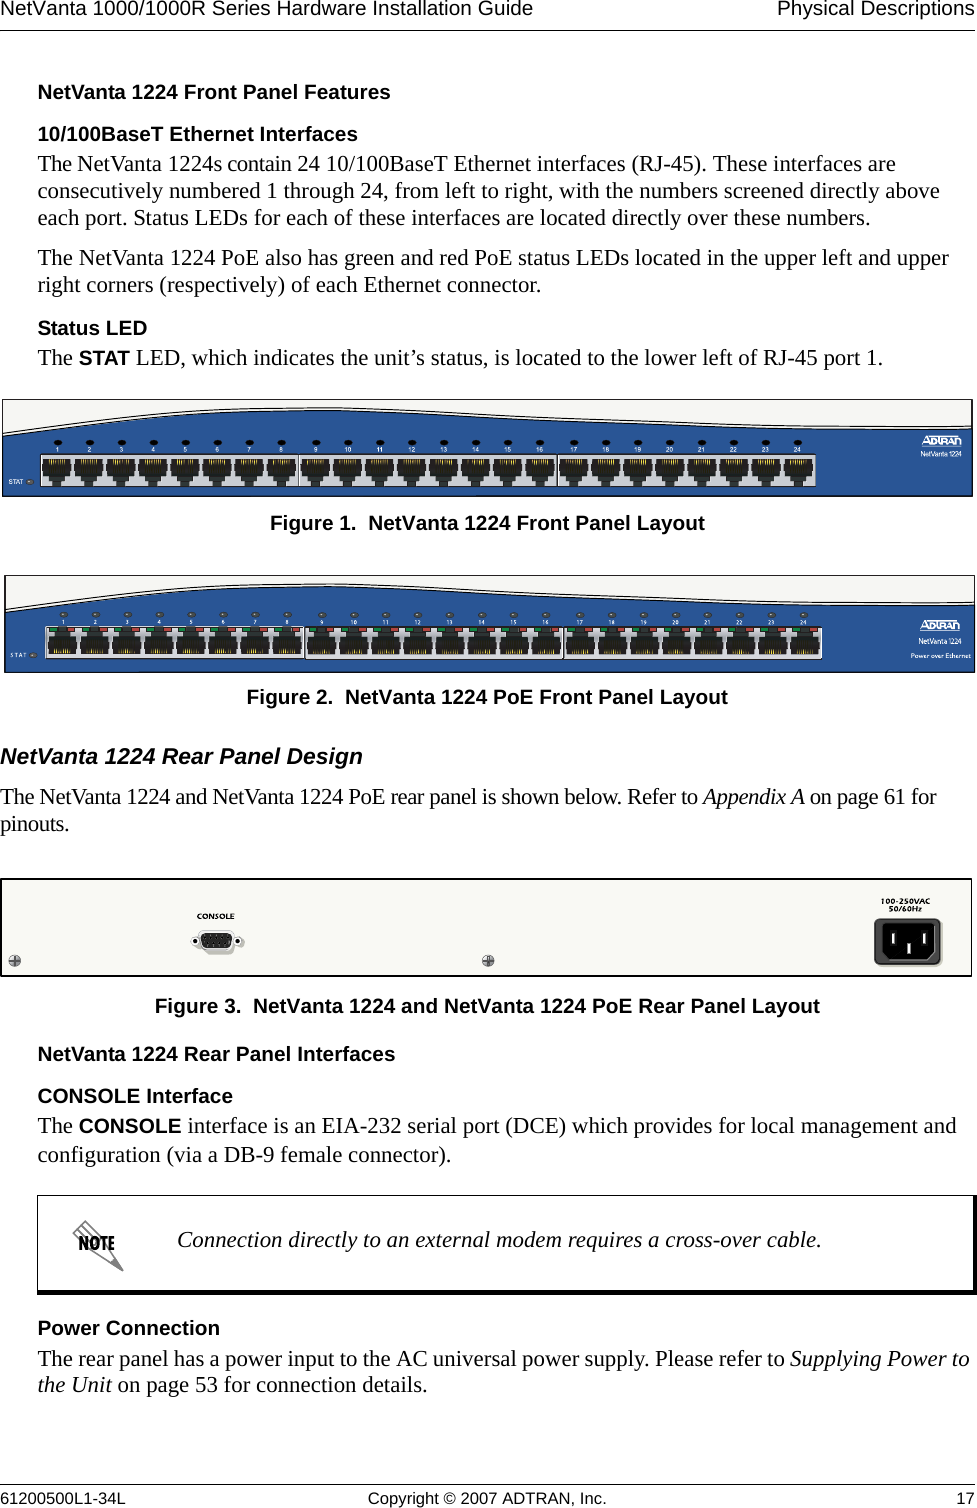 NetVanta 1000/1000R Series Hardware Installation Guide  Physical Descriptions61200500L1-34L Copyright © 2007 ADTRAN, Inc. 17NetVanta 1224 Front Panel Features10/100BaseT Ethernet InterfacesThe NetVanta 1224s contain 24 10/100BaseT Ethernet interfaces (RJ-45). These interfaces are consecutively numbered 1 through 24, from left to right, with the numbers screened directly above each port. Status LEDs for each of these interfaces are located directly over these numbers. The NetVanta 1224 PoE also has green and red PoE status LEDs located in the upper left and upper right corners (respectively) of each Ethernet connector. Status LEDThe STAT LED, which indicates the unit’s status, is located to the lower left of RJ-45 port 1. Figure 1.  NetVanta 1224 Front Panel LayoutFigure 2.  NetVanta 1224 PoE Front Panel LayoutNetVanta 1224 Rear Panel DesignThe NetVanta 1224 and NetVanta 1224 PoE rear panel is shown below. Refer to Appendix A on page 61 for pinouts.Figure 3.  NetVanta 1224 and NetVanta 1224 PoE Rear Panel LayoutNetVanta 1224 Rear Panel InterfacesCONSOLE InterfaceThe CONSOLE interface is an EIA-232 serial port (DCE) which provides for local management and configuration (via a DB-9 female connector).Power ConnectionThe rear panel has a power input to the AC universal power supply. Please refer to Supplying Power to the Unit on page 53 for connection details.Connection directly to an external modem requires a cross-over cable.